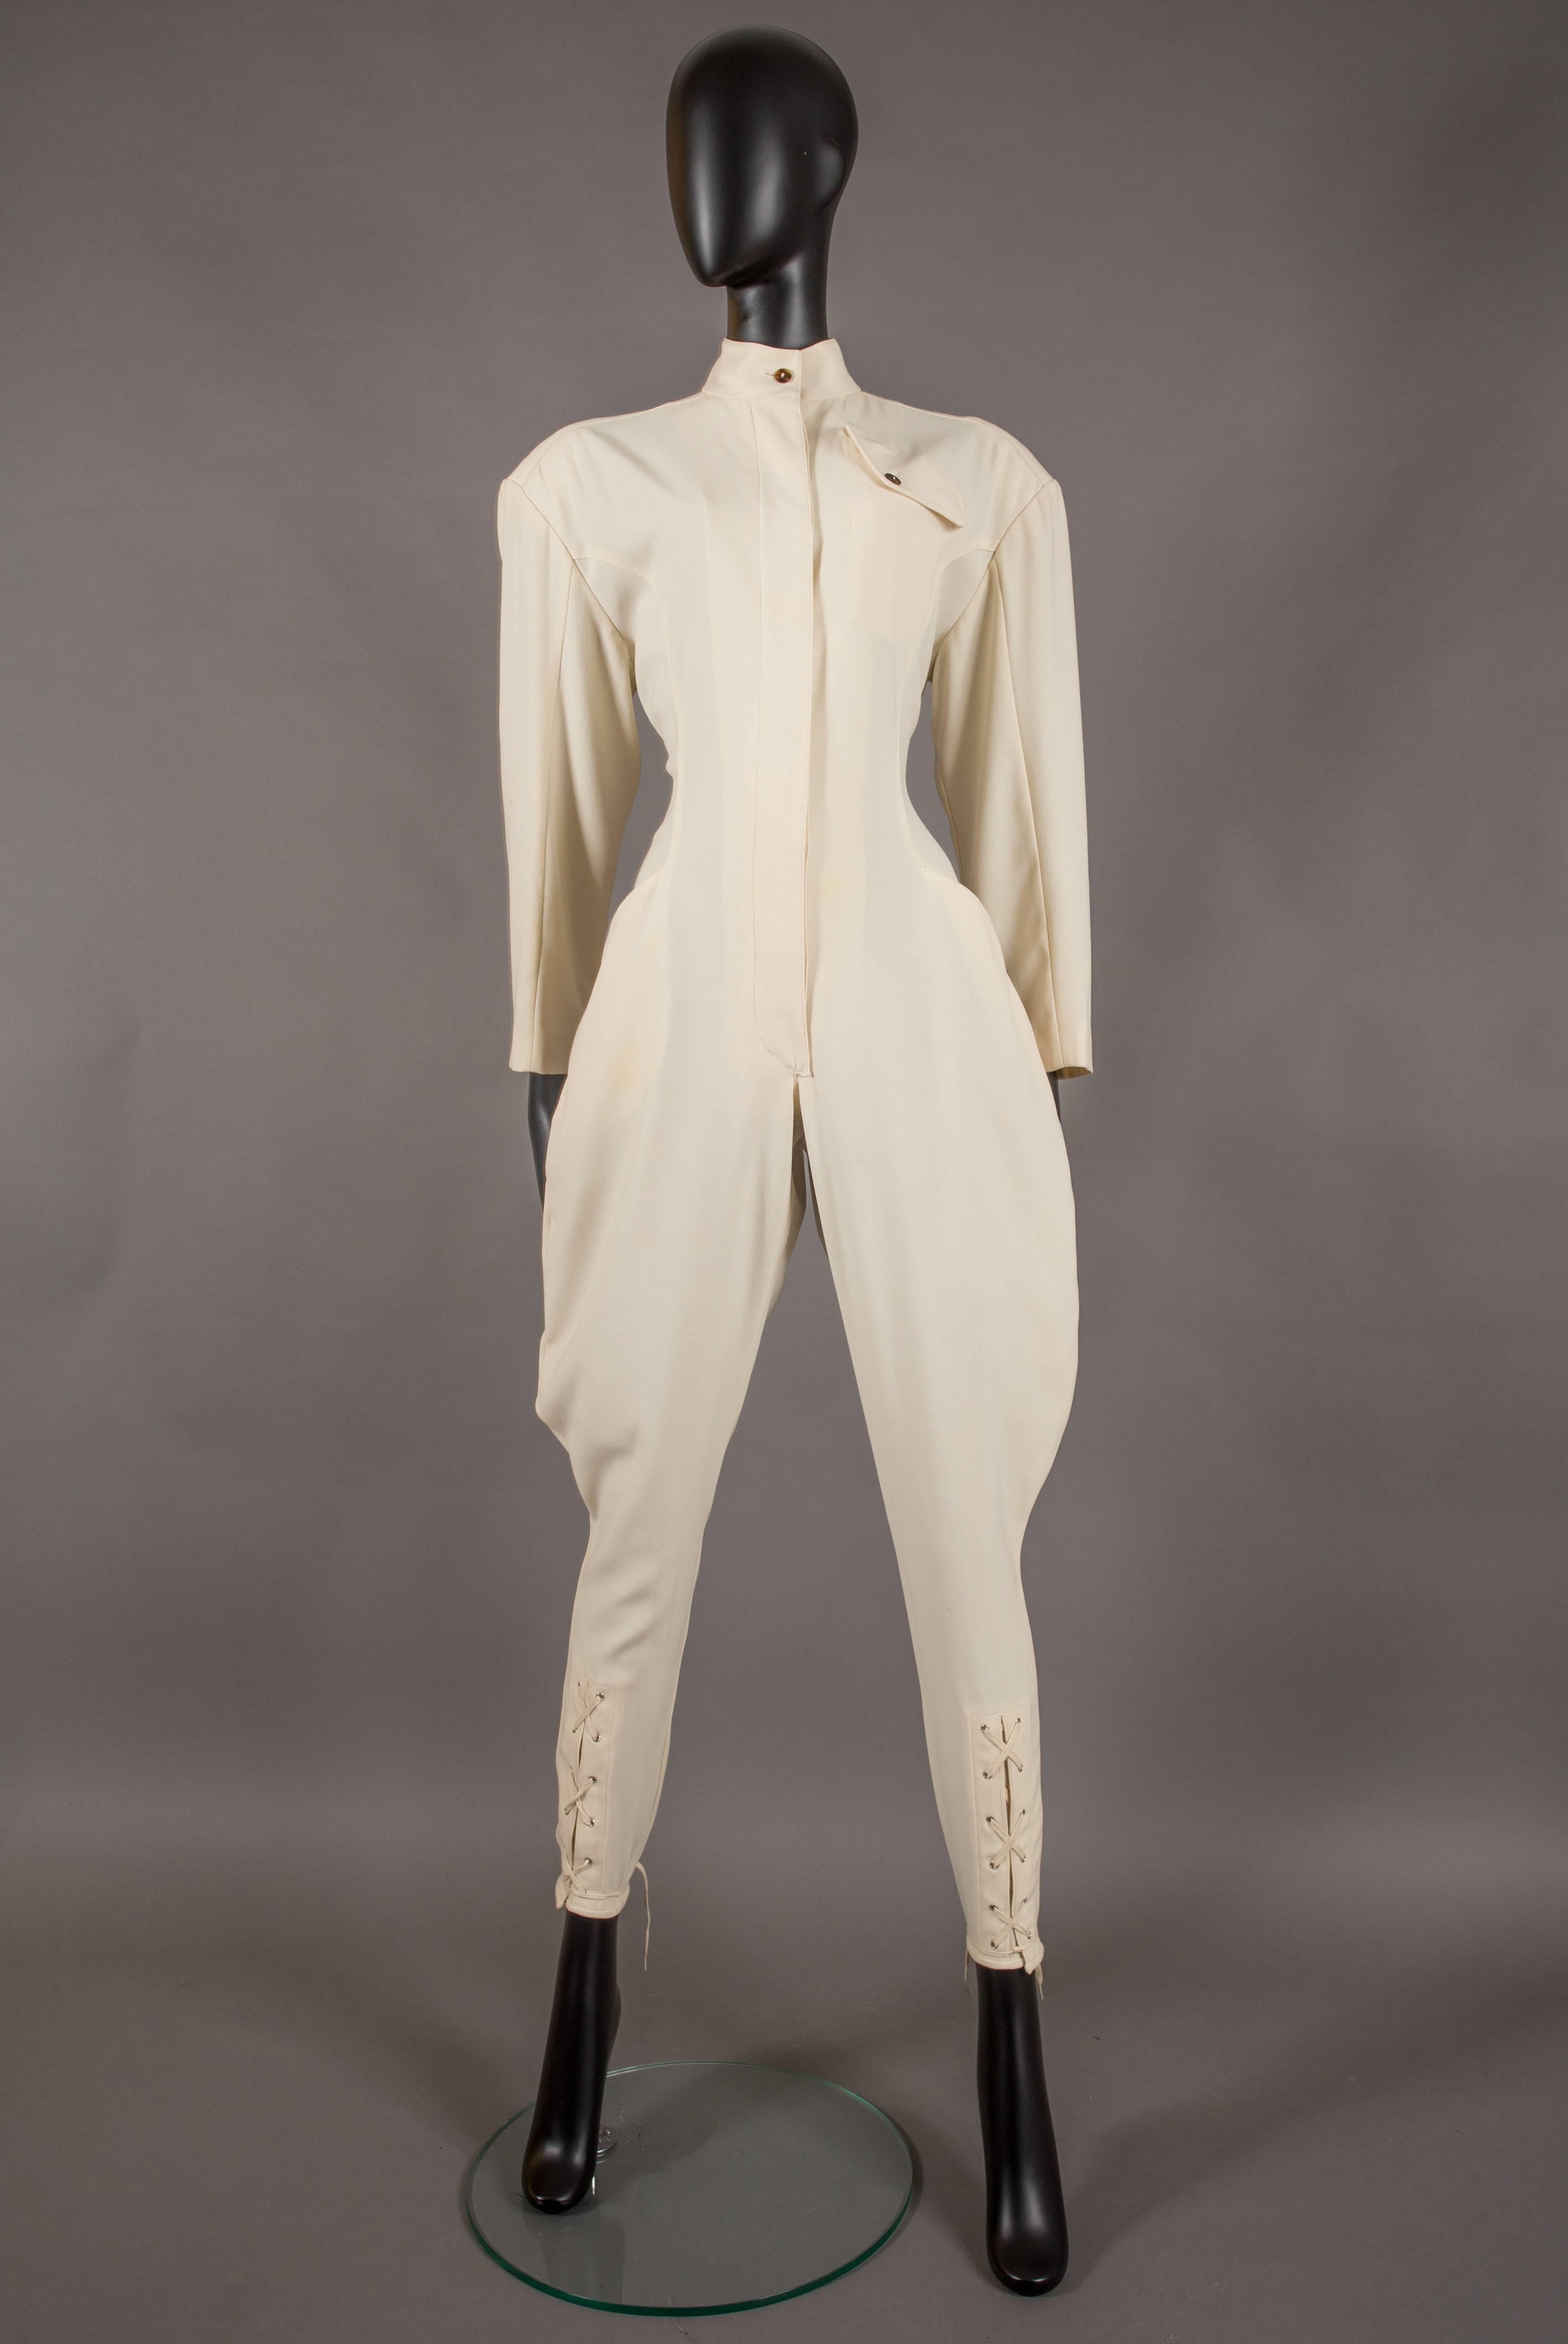 A rare Jean Paul Gaultier ivory jodhpur jumpsuit, circa 1987. 

Exaggerated shoulders with interior shoulder pads, high standing collar, tortoise buttons throughout, two side open pockets, lace-up closures on ankles and wide up sleeves. 

